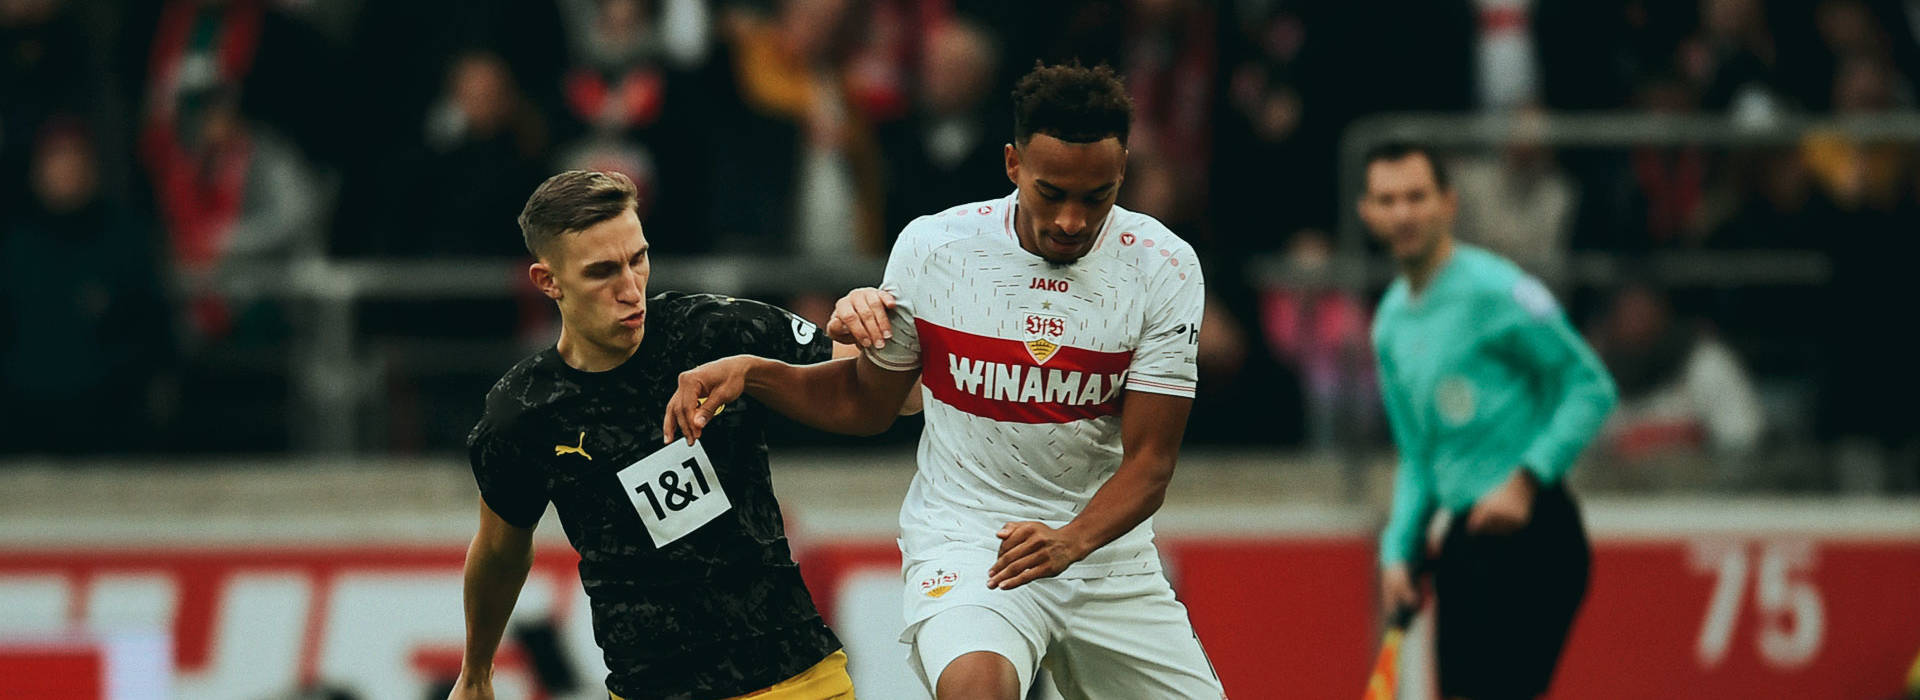 VfB against BVB in the DFB-Pokal for the sixth time